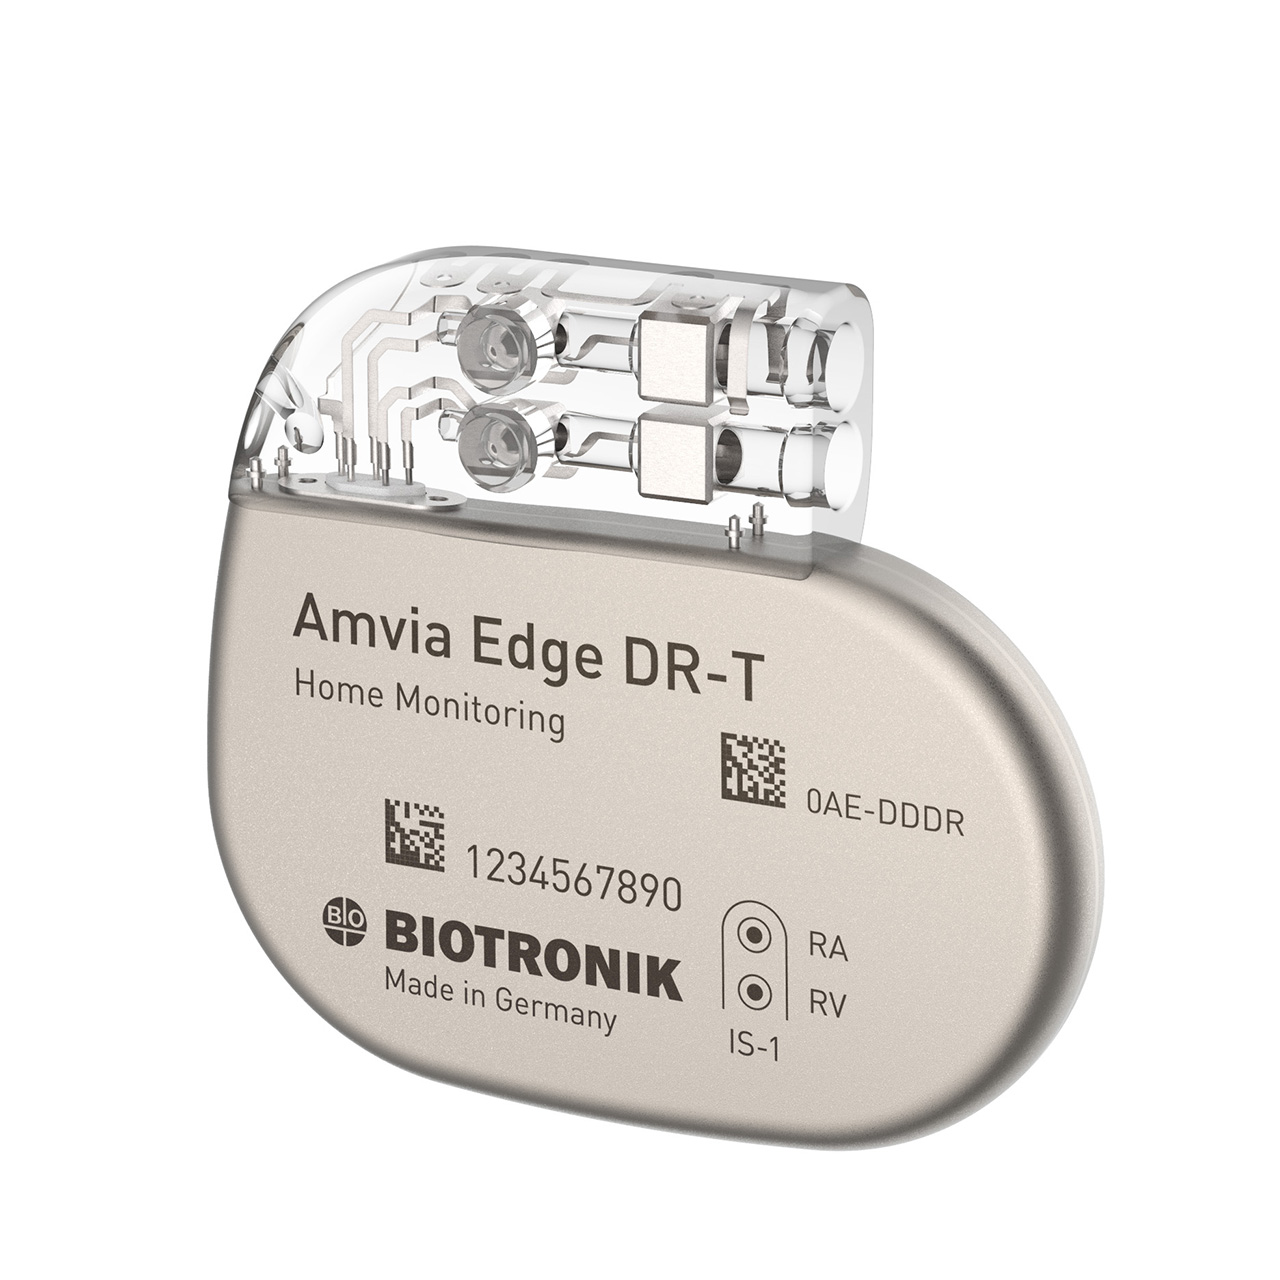 Amvia Edge DR-T dual-chamber pacemaker